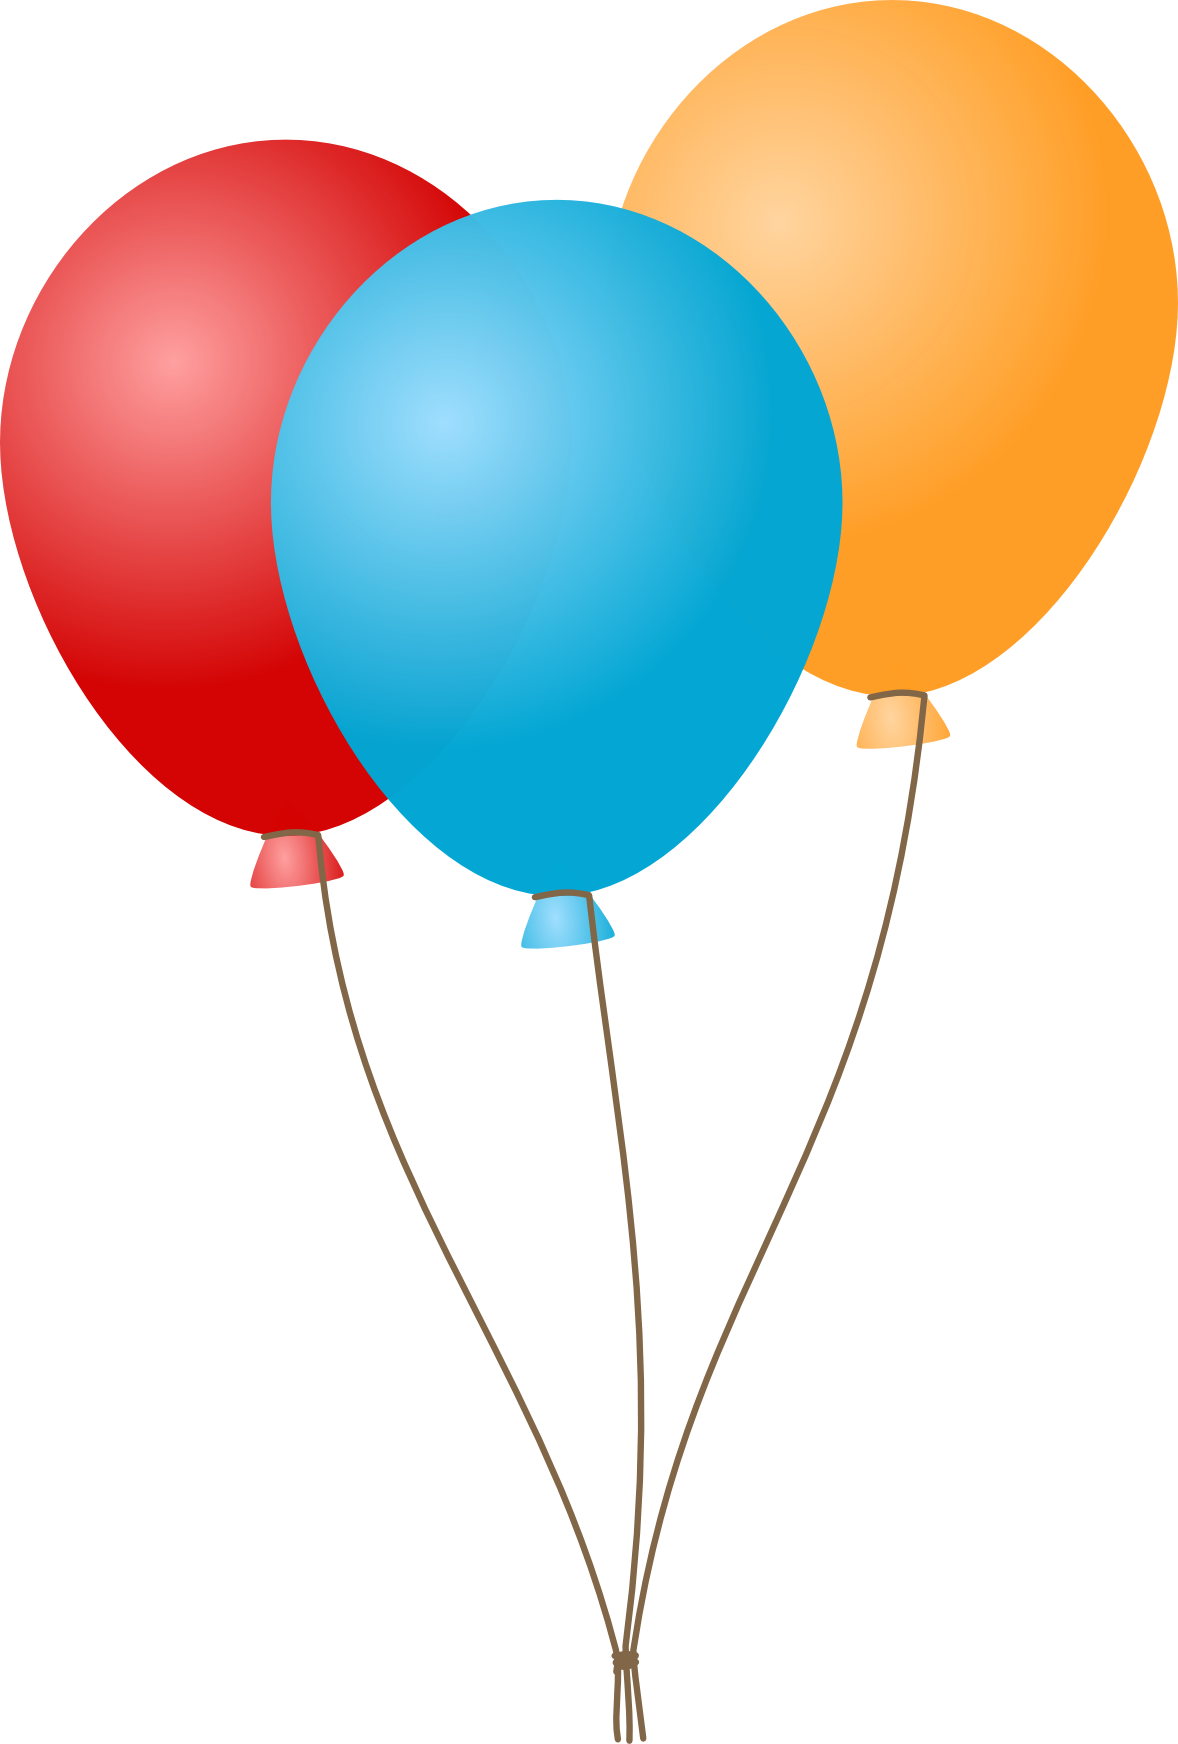 Free picture download with. Balloon images png